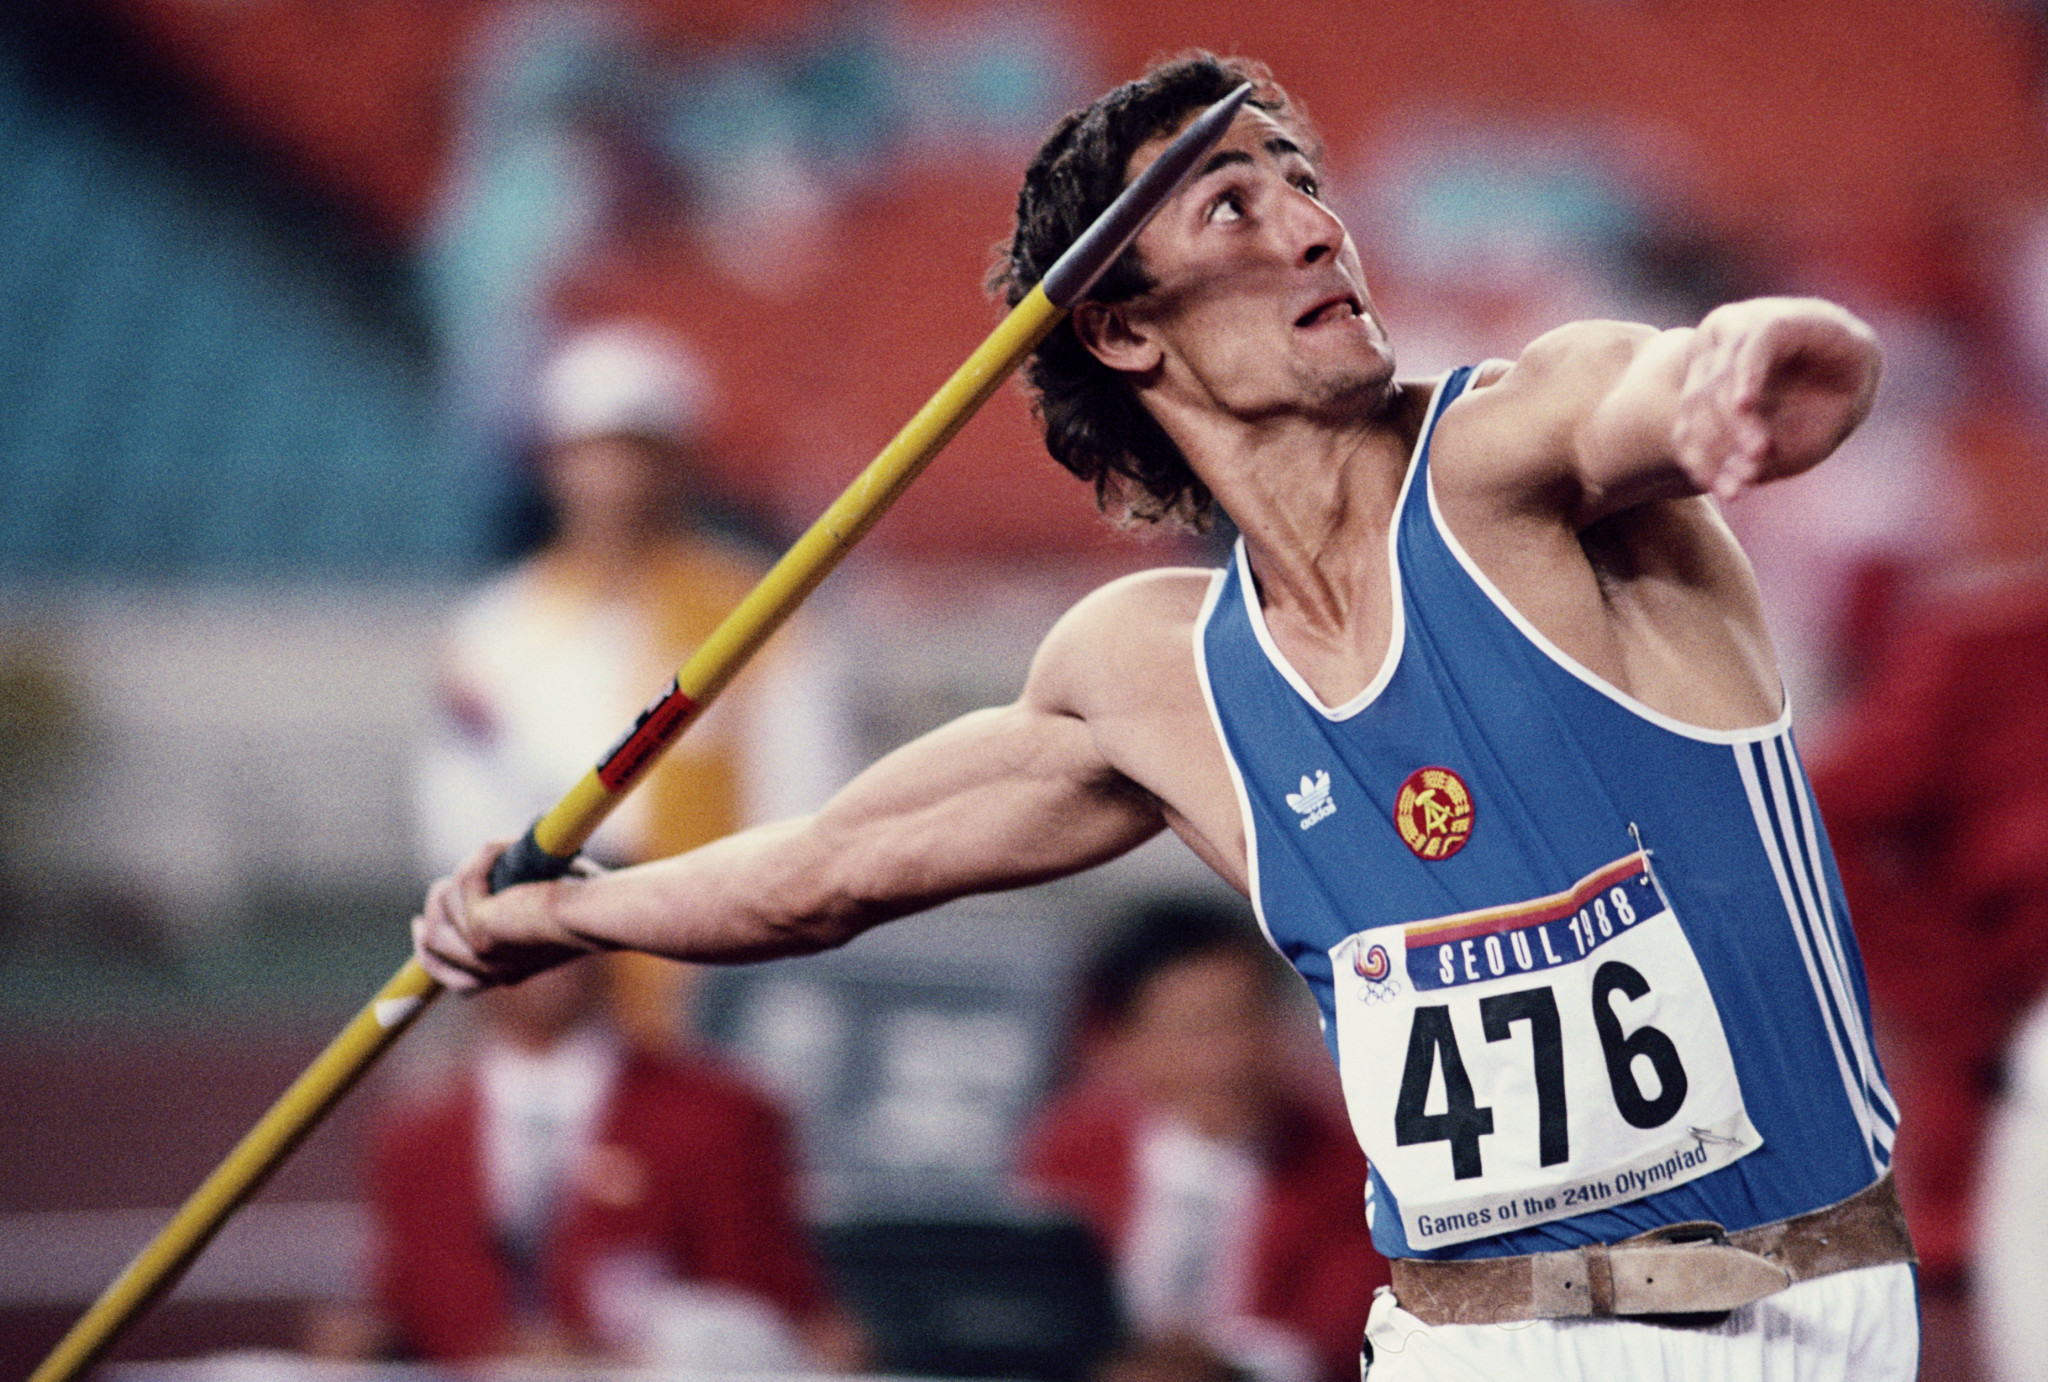 Seoul 1988 Olympic champion Schenk admits doping in book but will keep gold